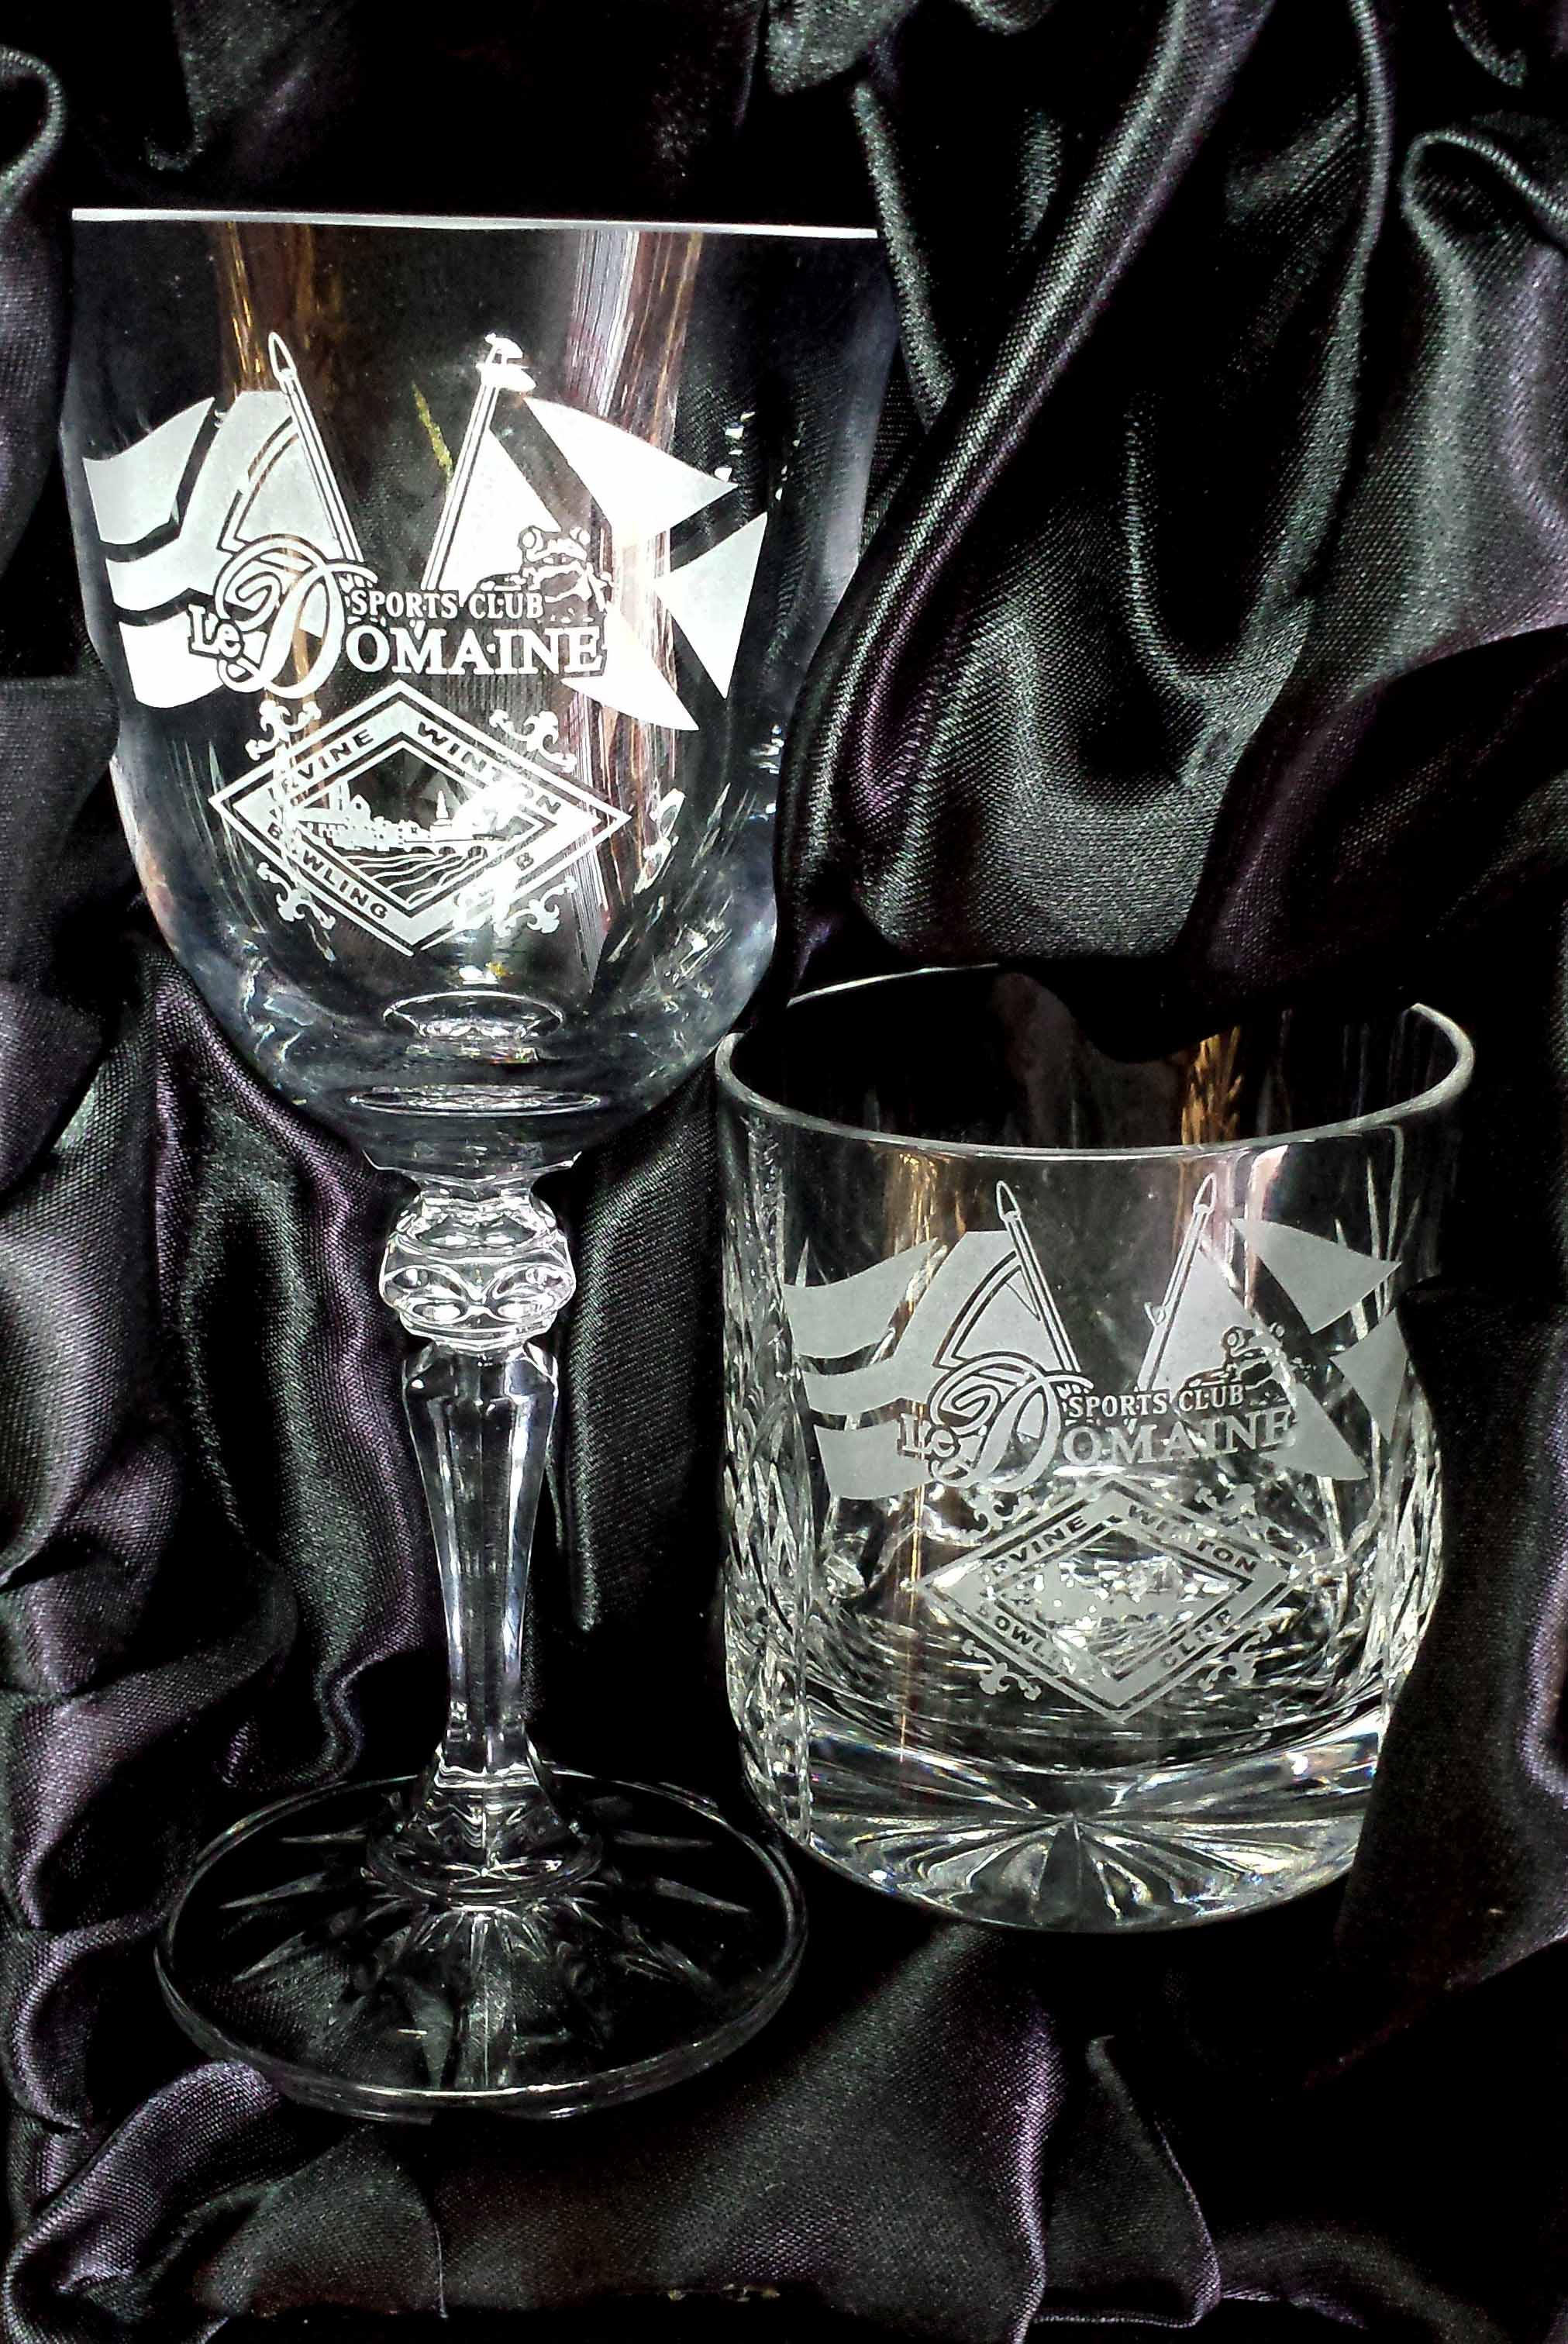 A Wine and a whisky glass engraved with the logo of LeDomaine Sports Club and Irvine Winton Bowling club plus the flags of Scotland and South Africa.